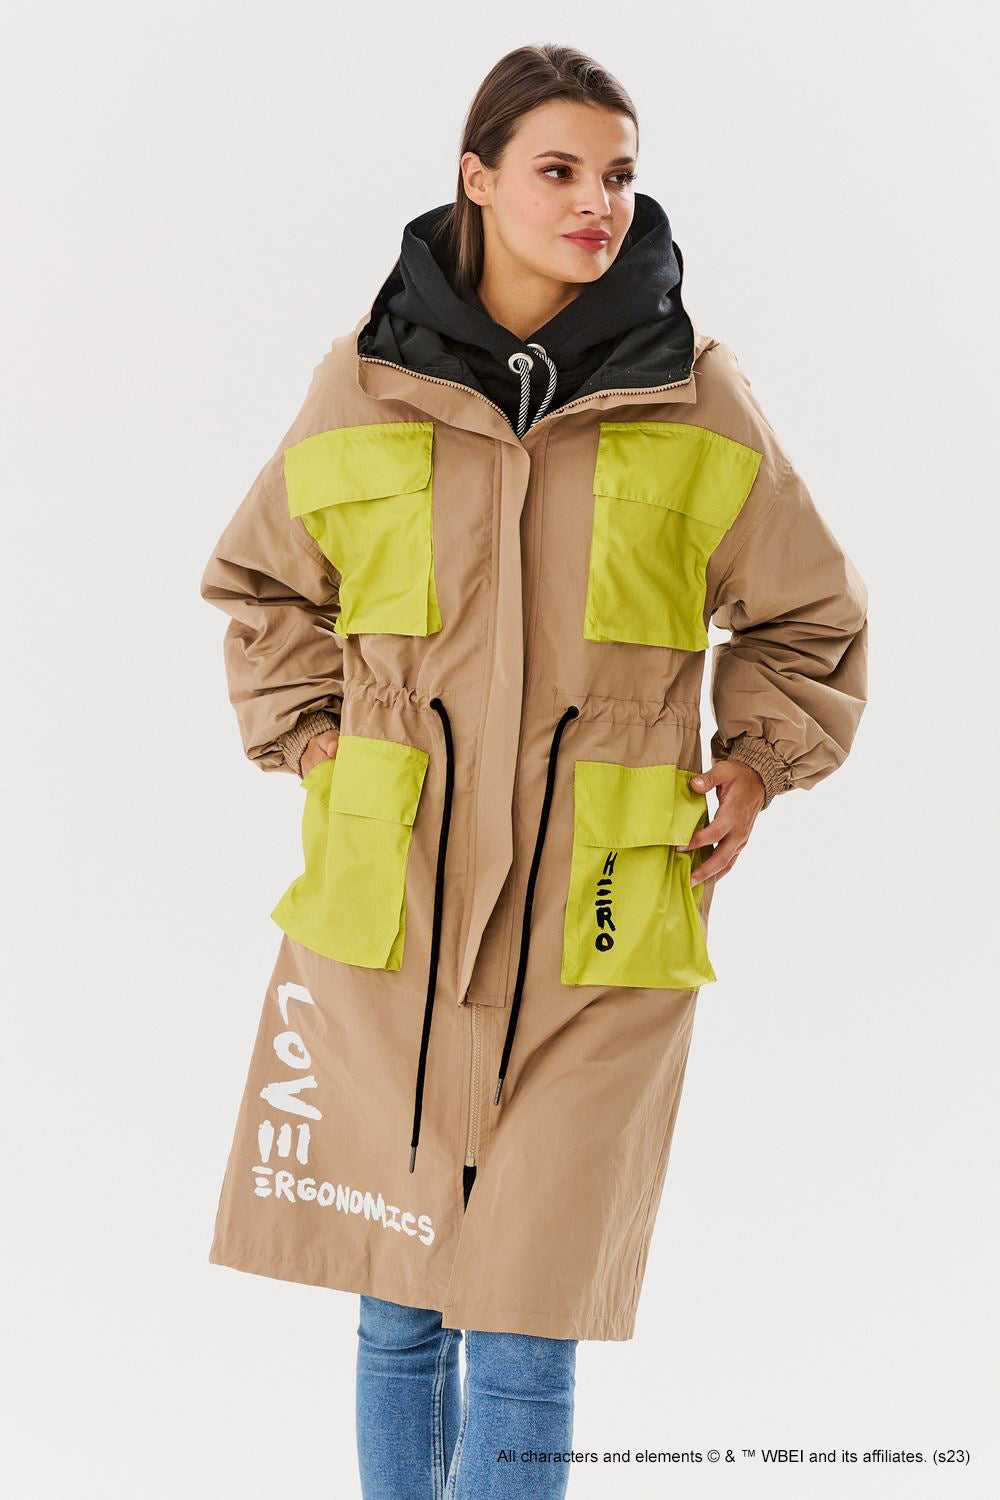 Parka Sky Is Not The Limit